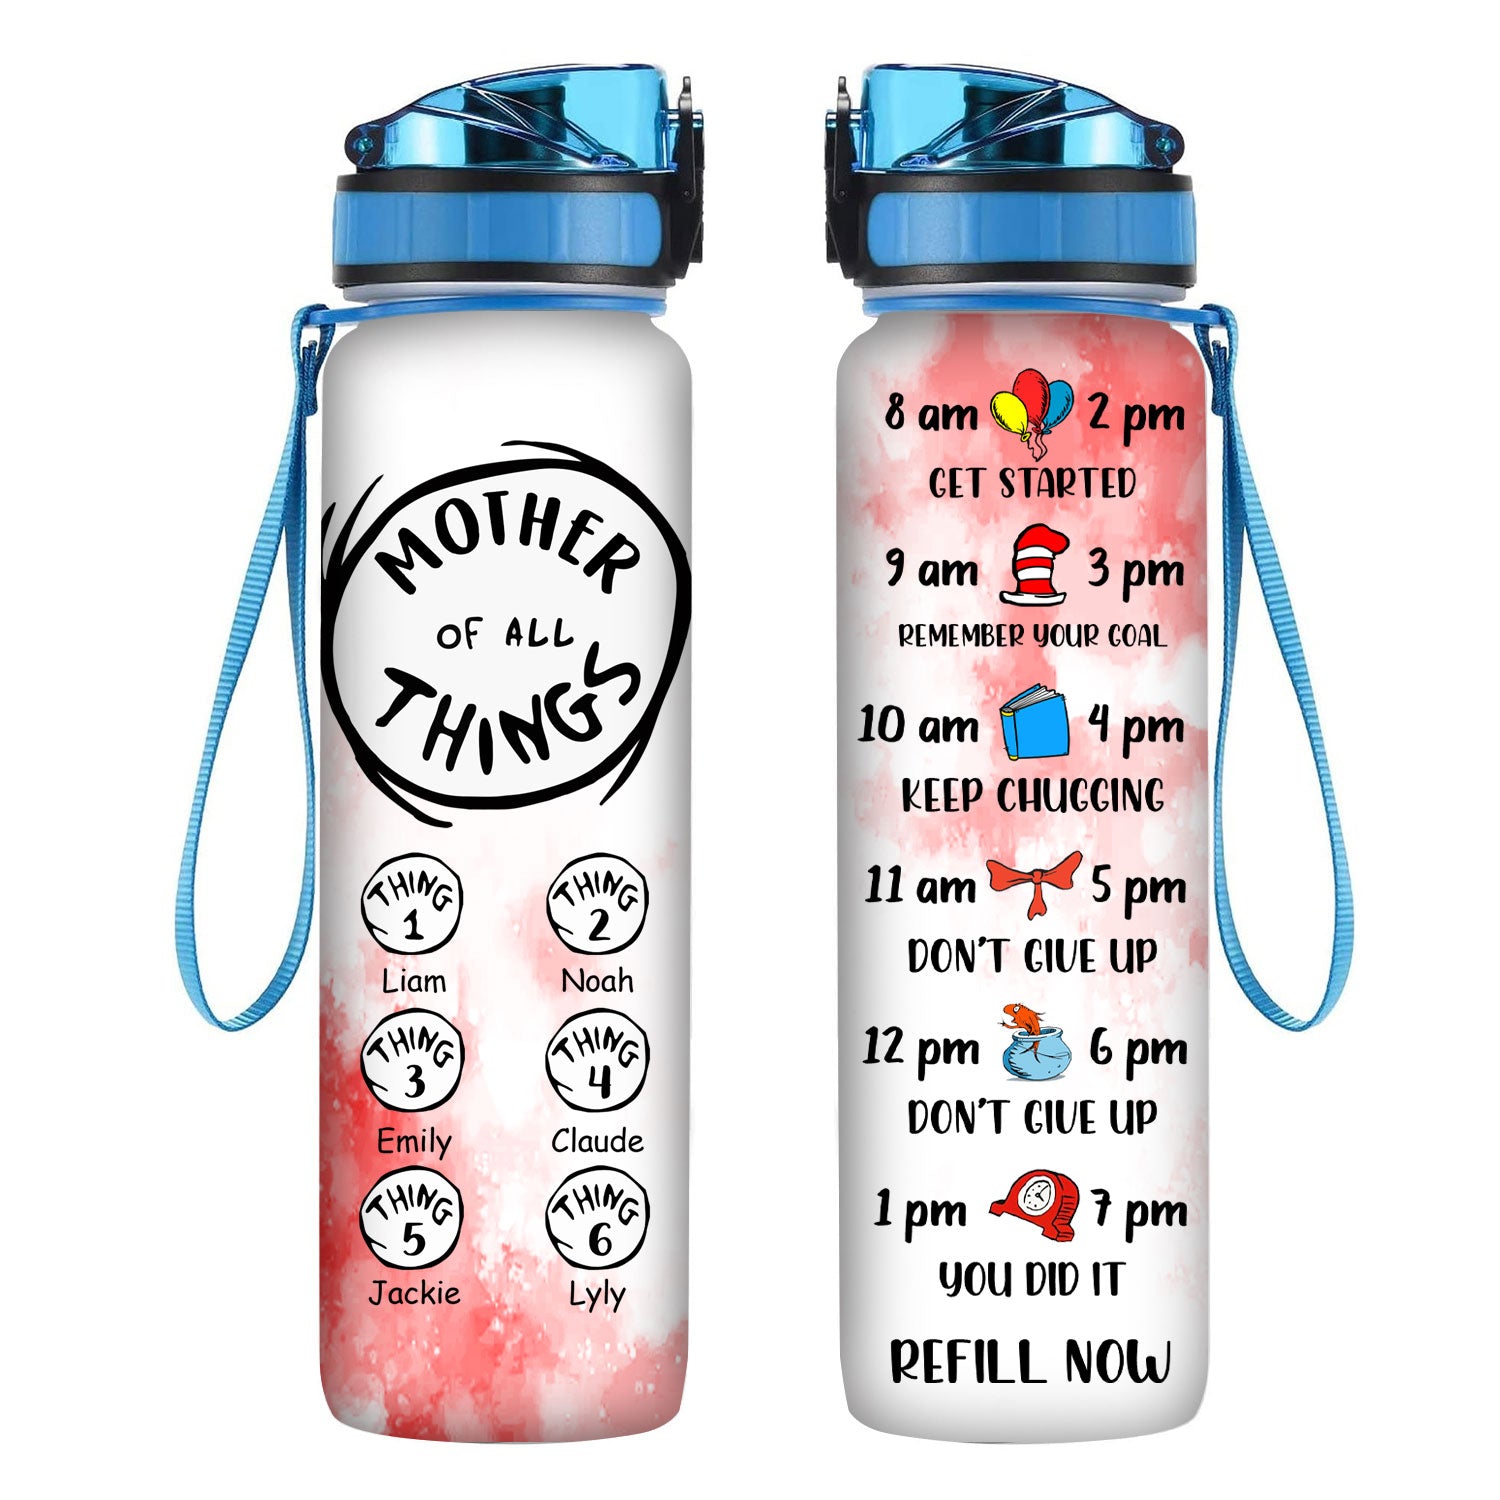 Bonding Over Water - Personalized Water Tracker Bottle - Funny